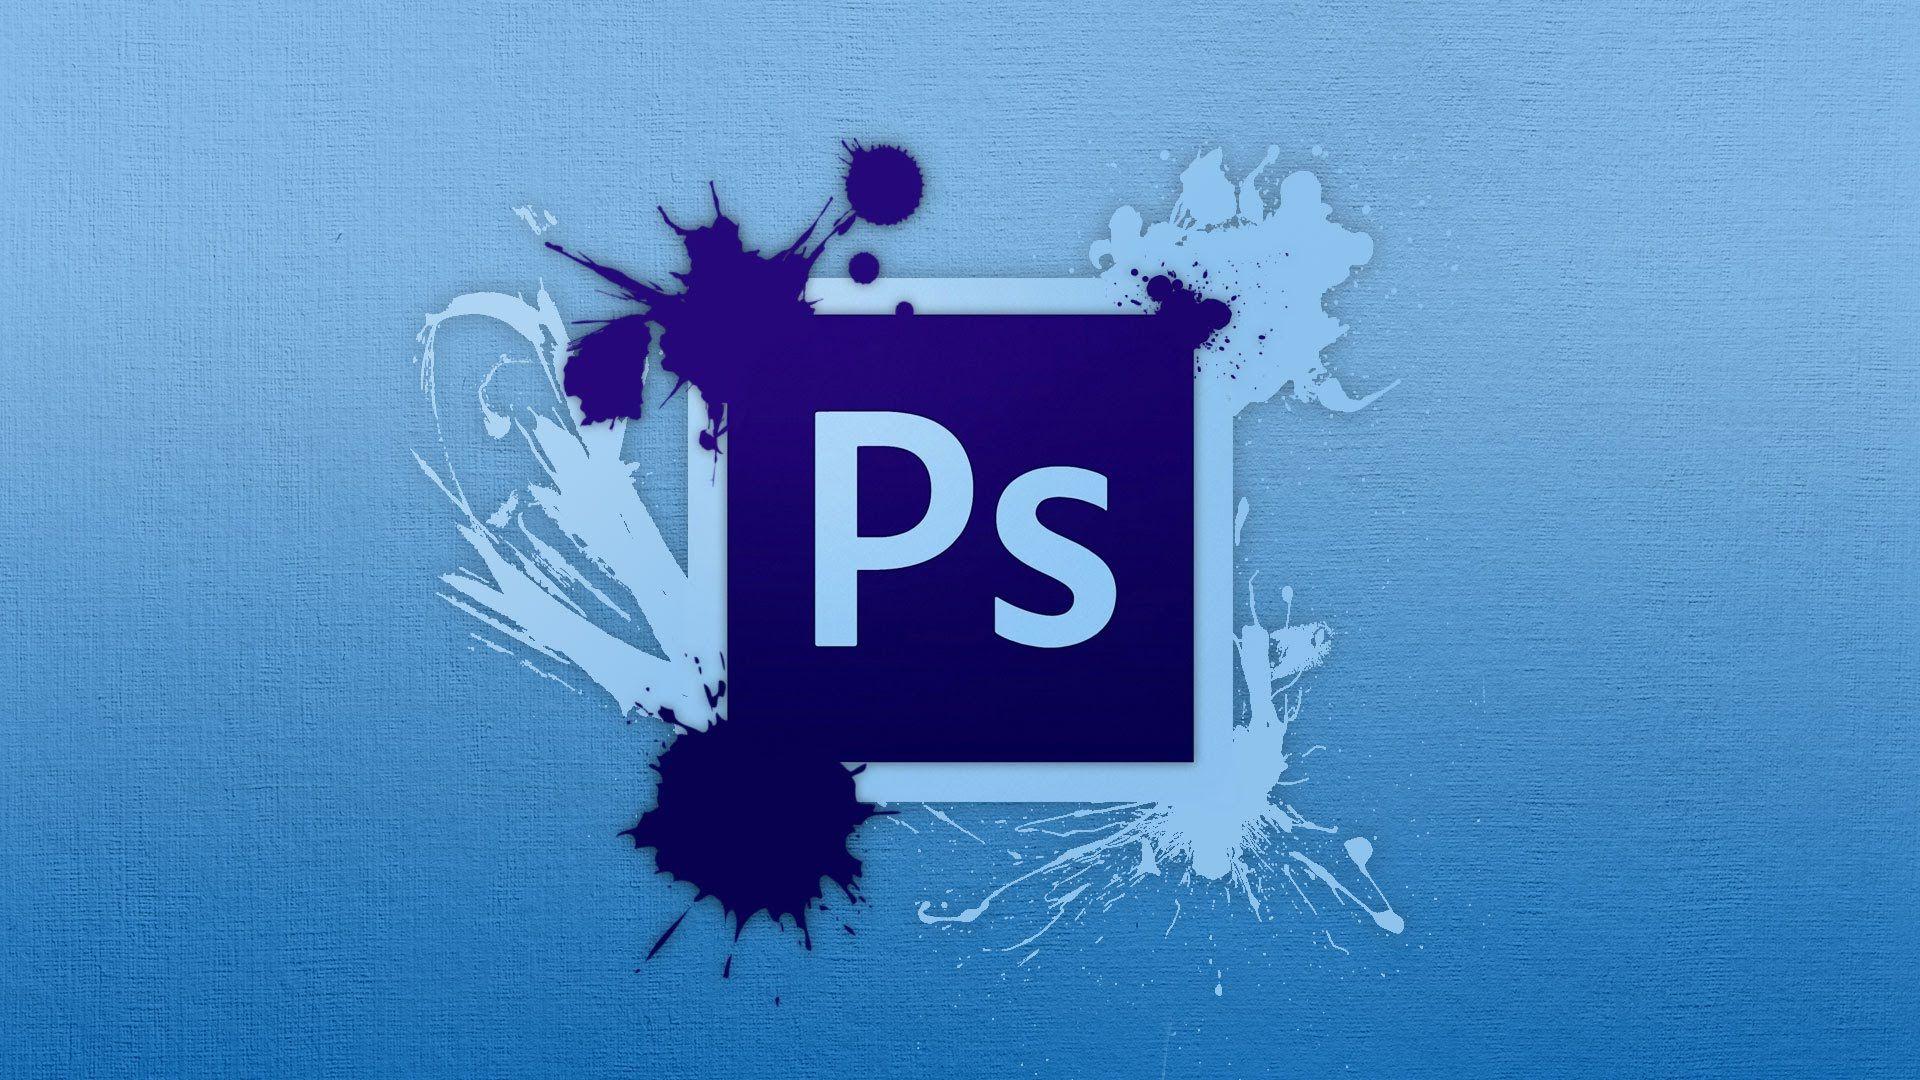 Adobe Photoshop Logo - 12 Key Photoshop Shortcuts All Graphic Designers Must Know